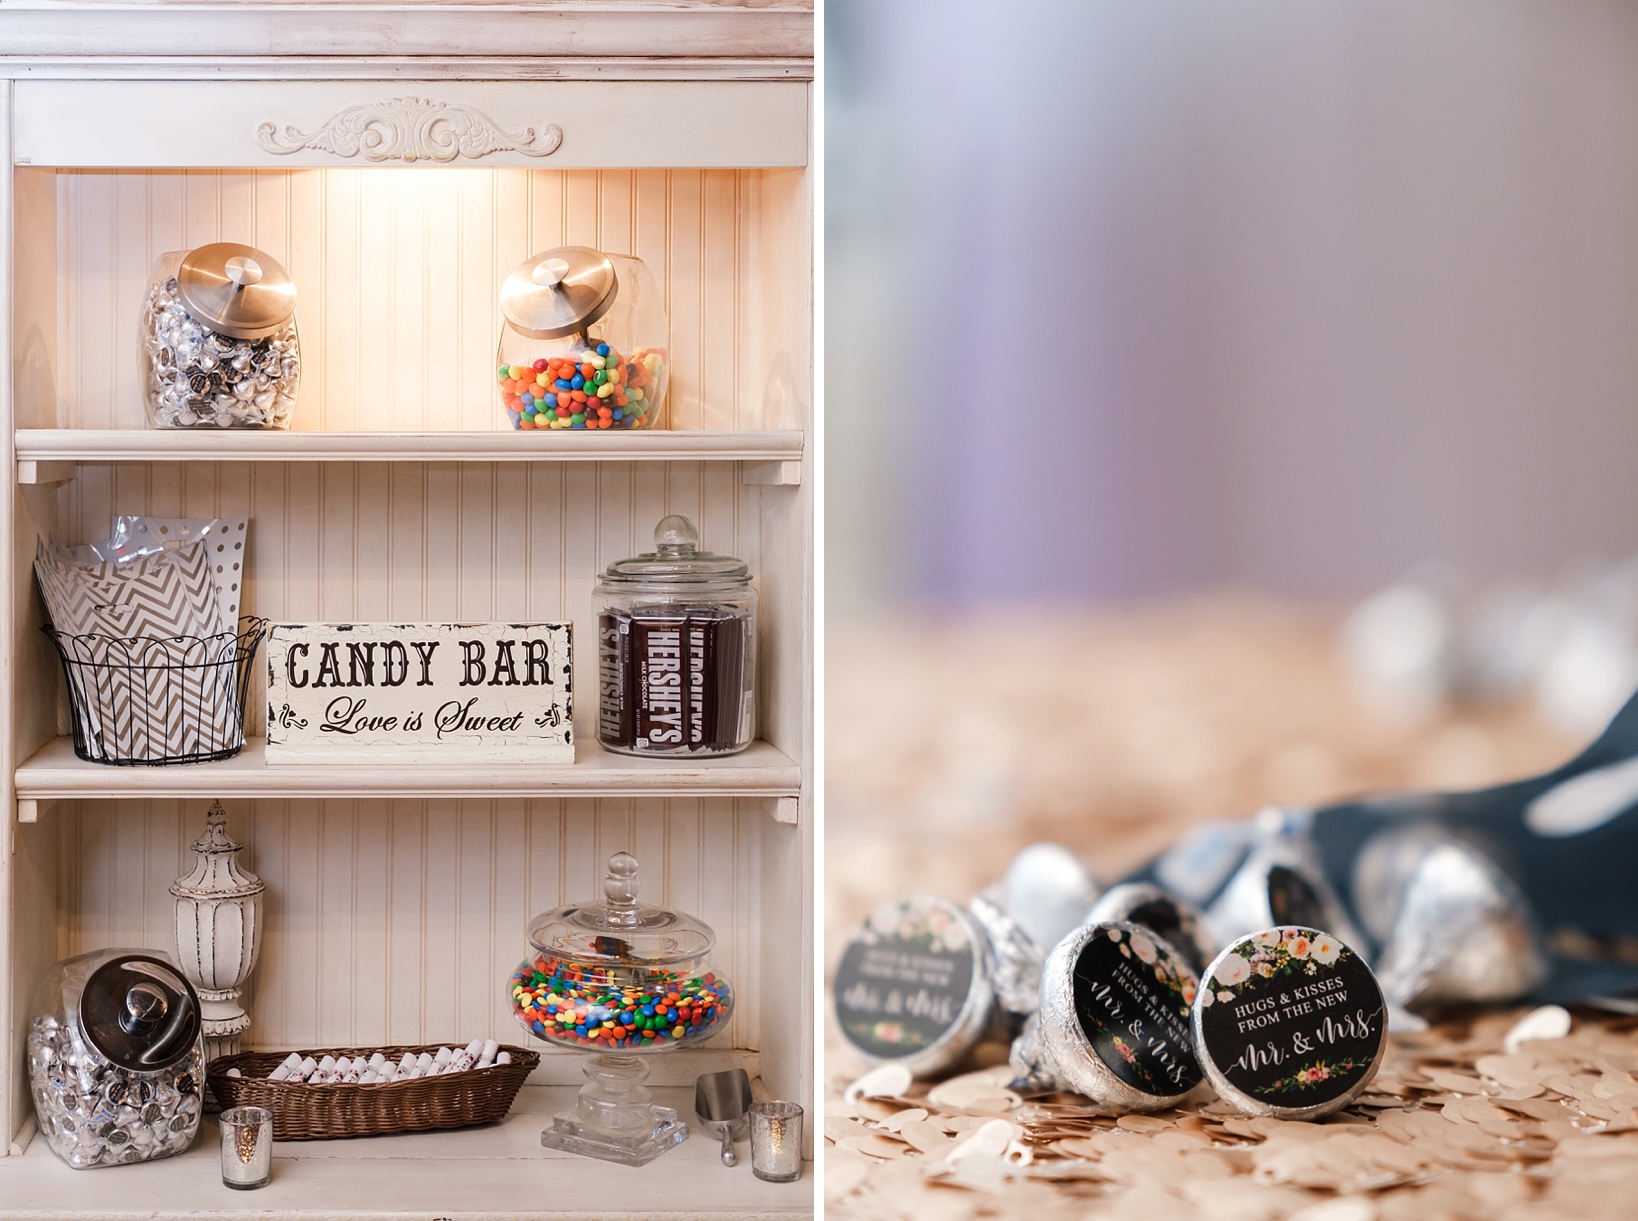 Wedding gifts for the guests include a variety of candy